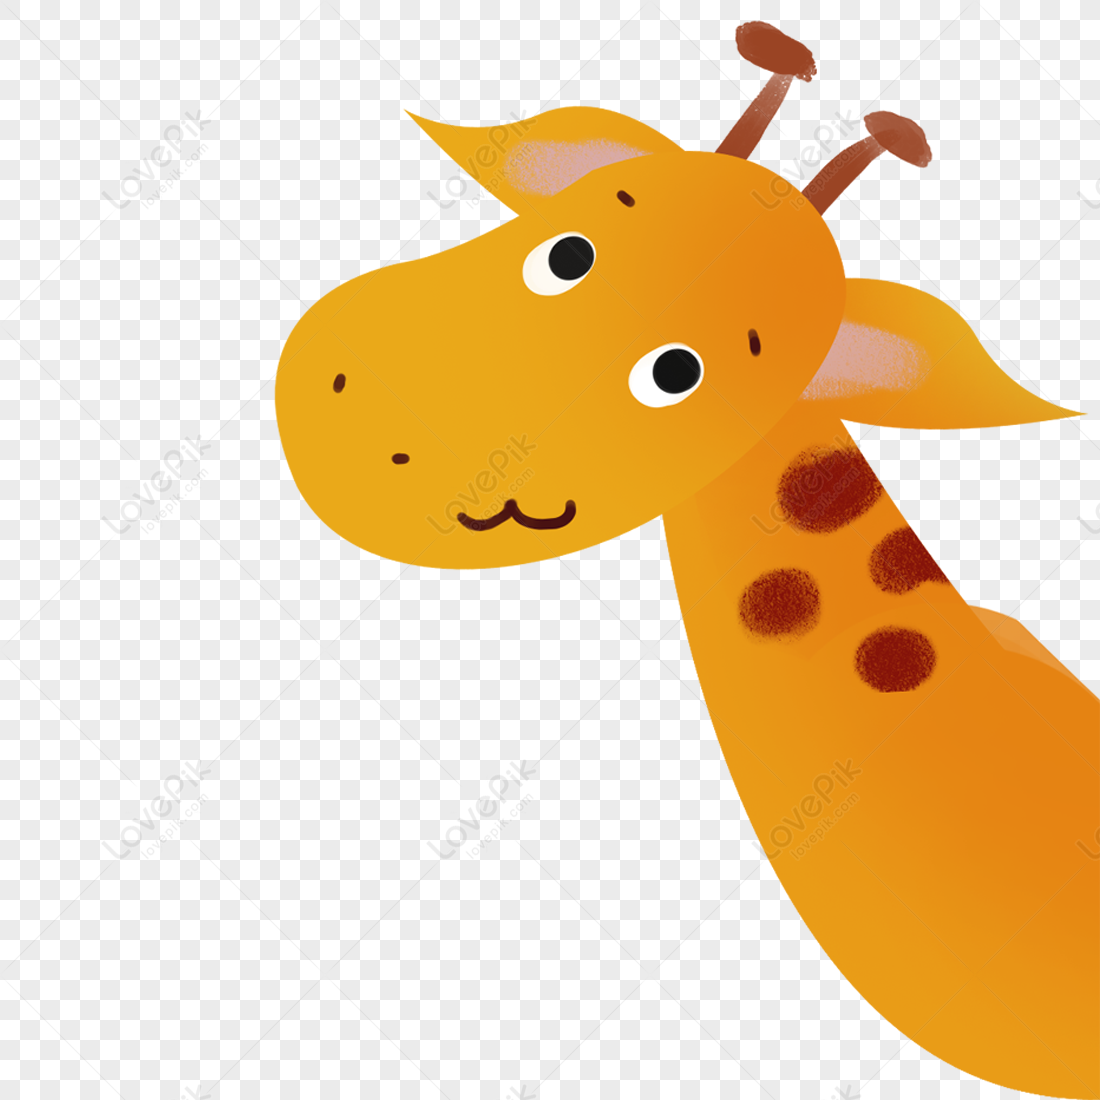 Cute Giraffe Cartoon PNG Transparent Background And Clipart Image For Free  Download - Lovepik | 400232970